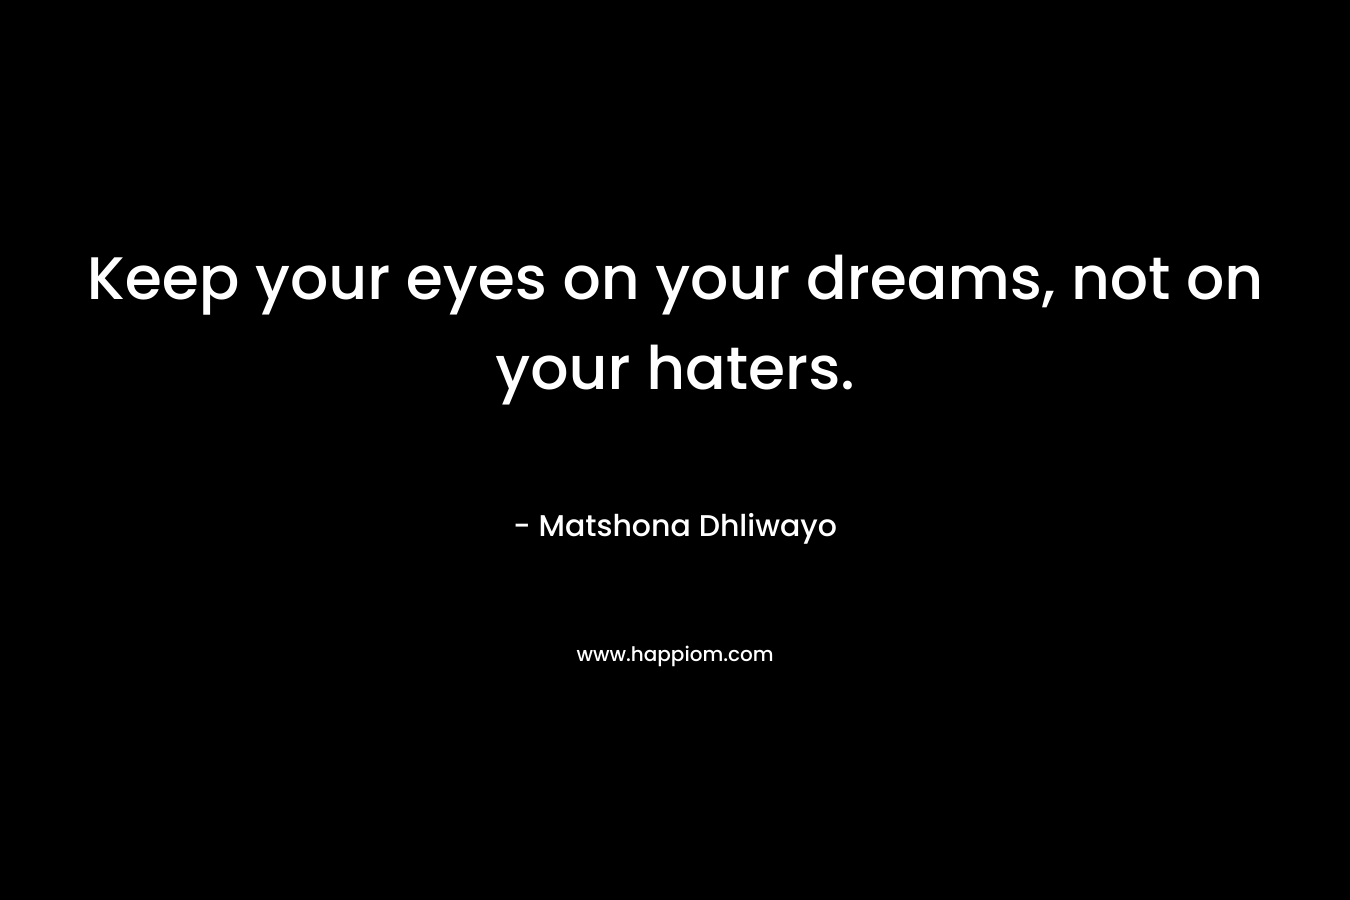 Keep your eyes on your dreams, not on your haters.